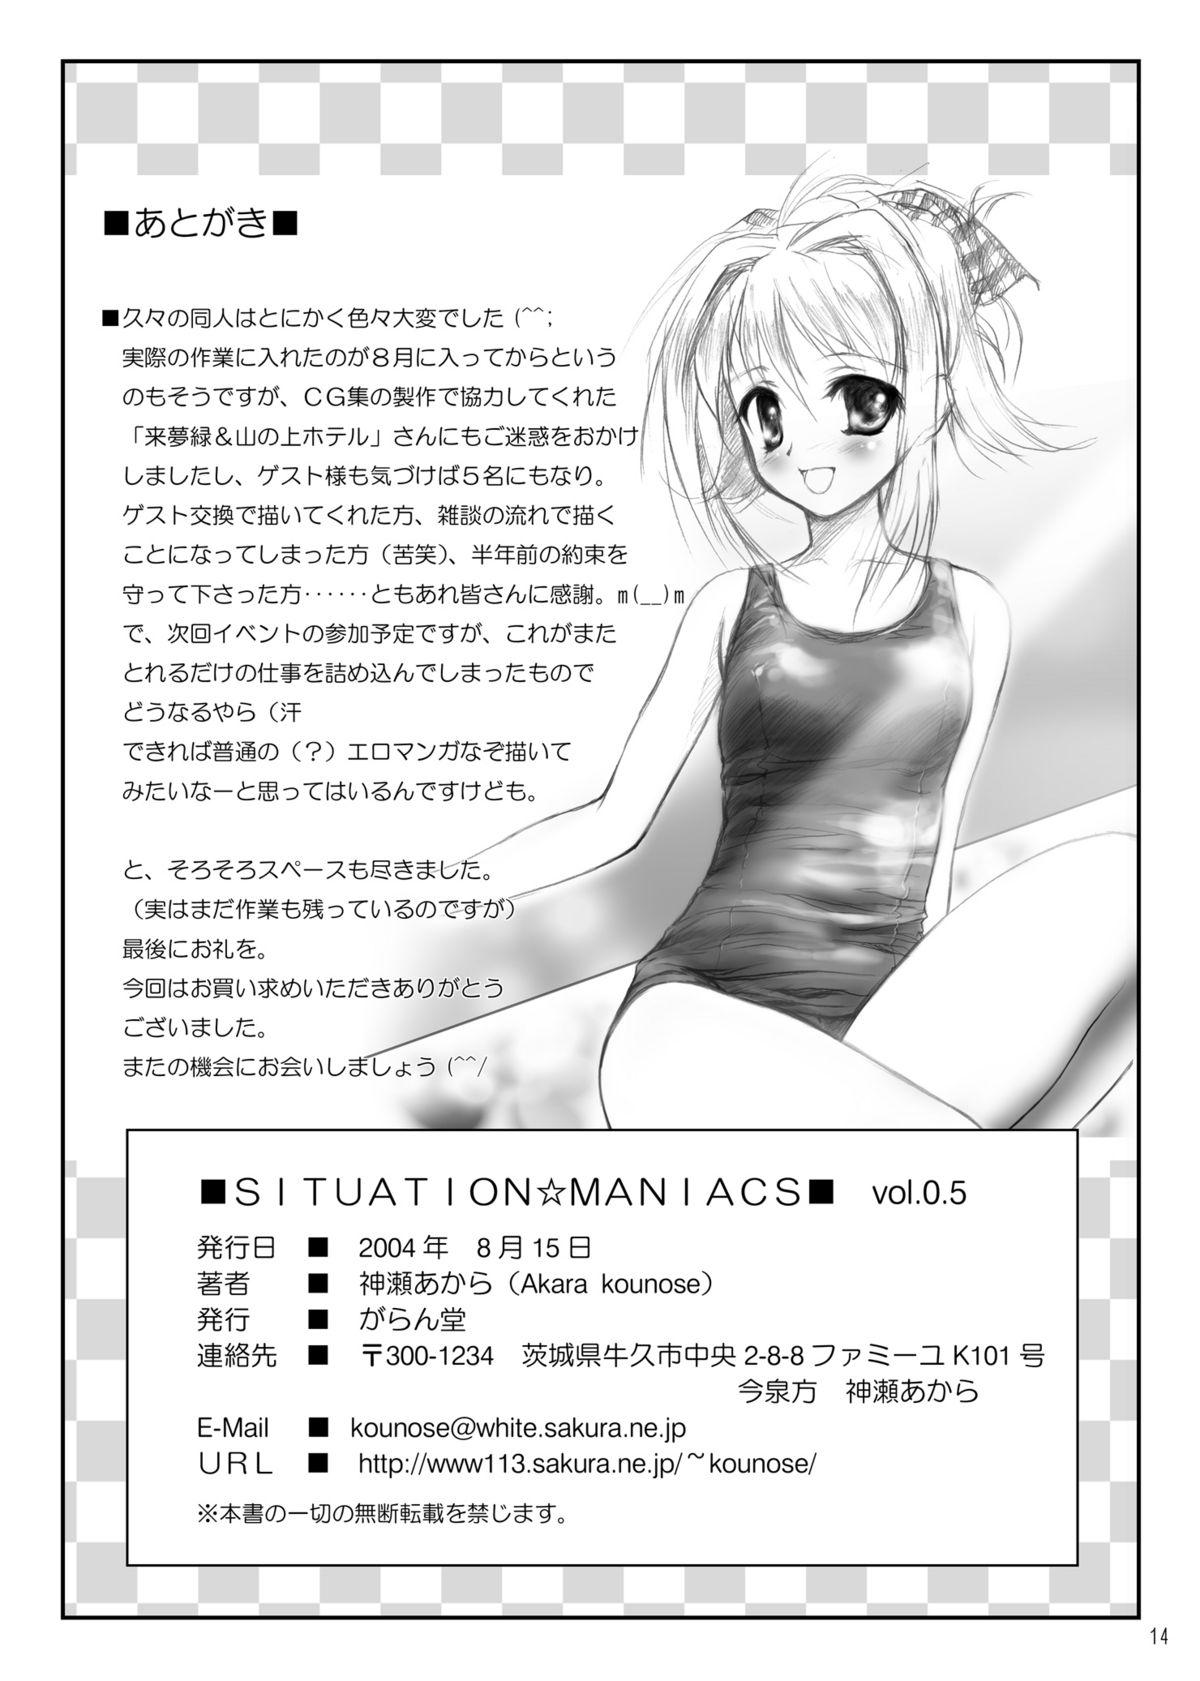 Ftvgirls Situation Maniacs vol.0.5 Omake Hon - Fate stay night Couple Porn - Page 7